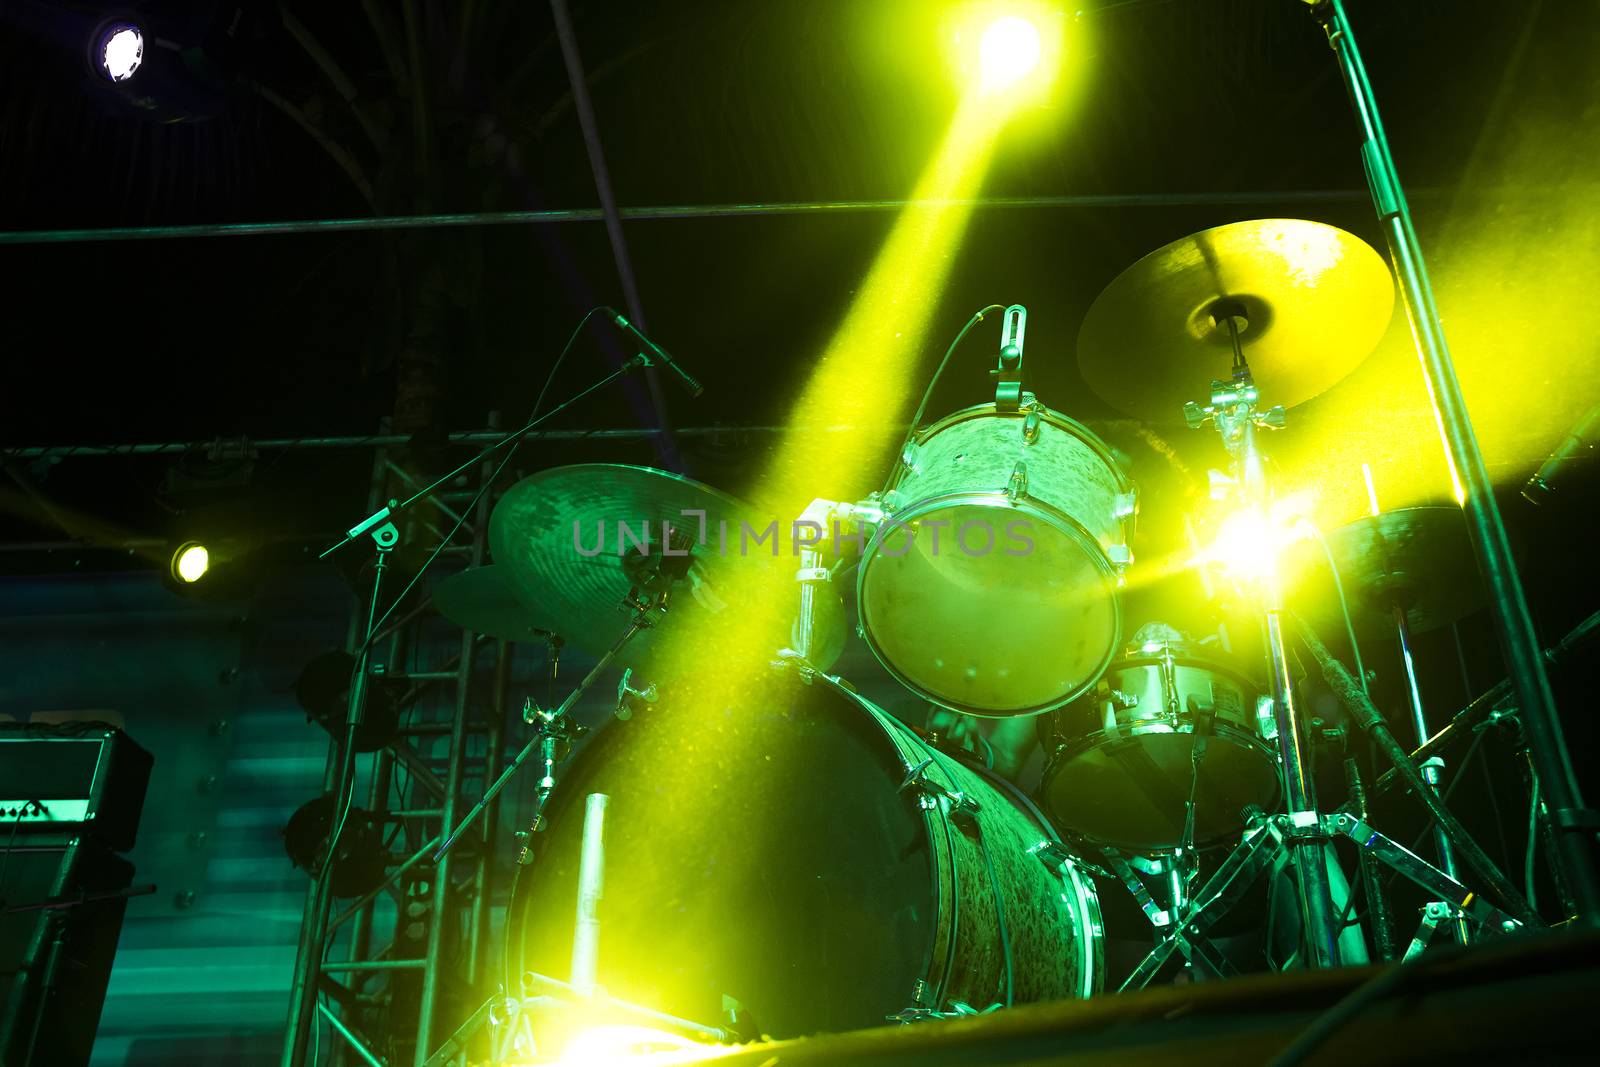 Drumset on an empty stage light with strong backlight